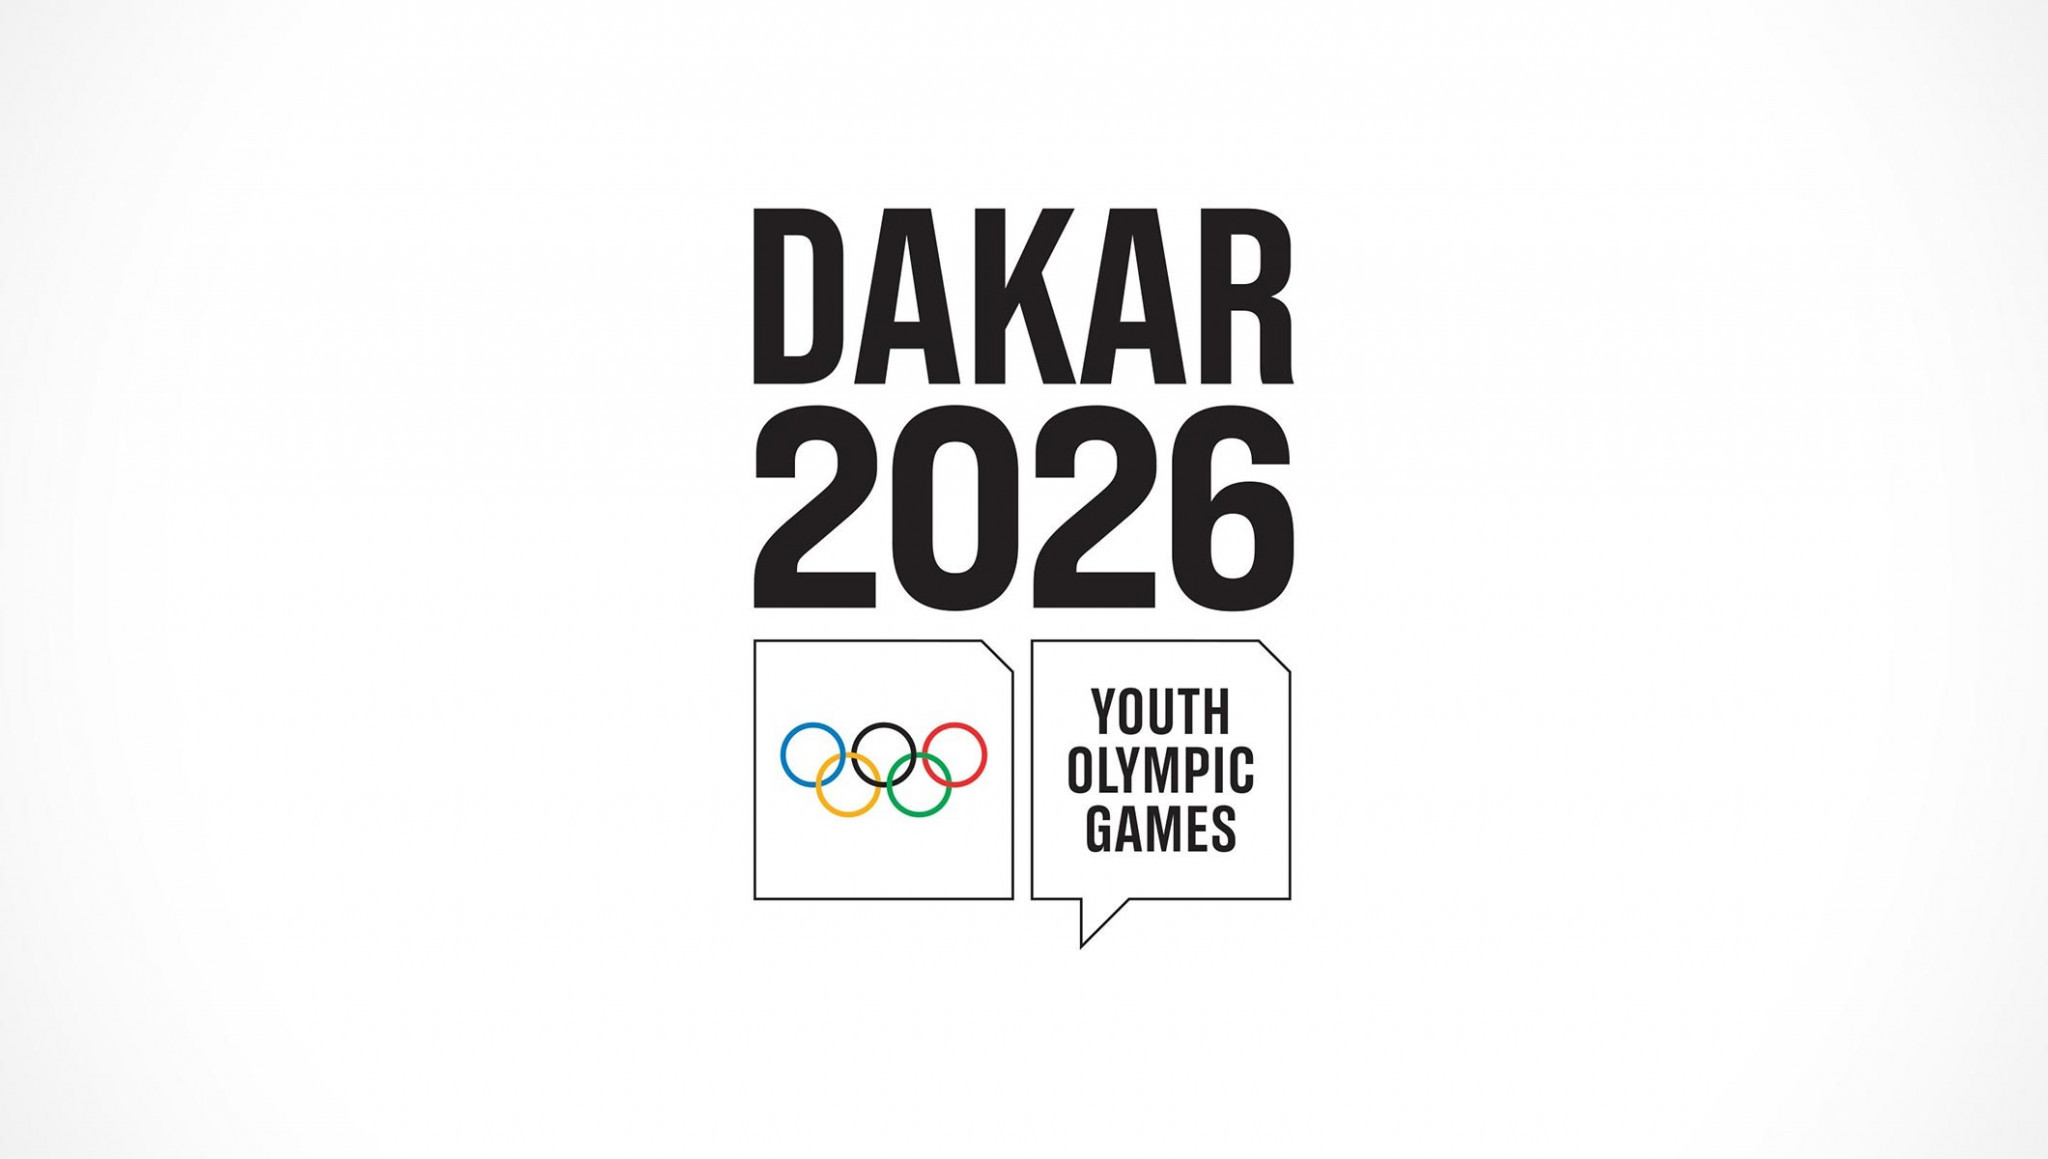 The third Coordination Commission meeting for Dakar 2026 saw sport development initiatives and venue renovations discussed ©IOC/Dakar 2026